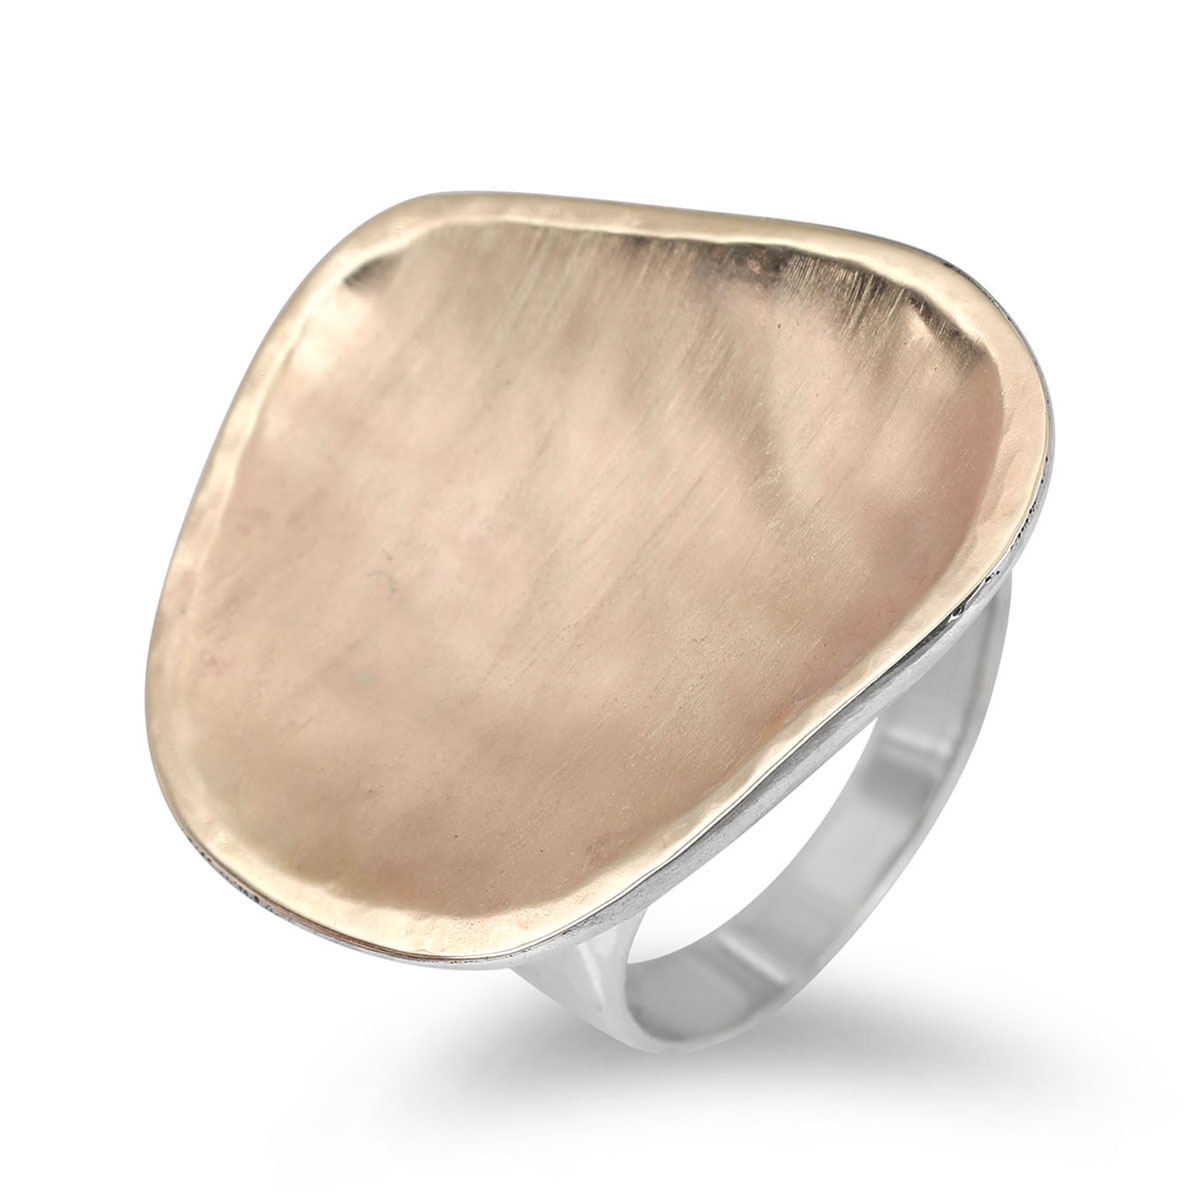 Moriah Jewelry Matte Contemporary Gold and Sterling Silver Ring  - 1